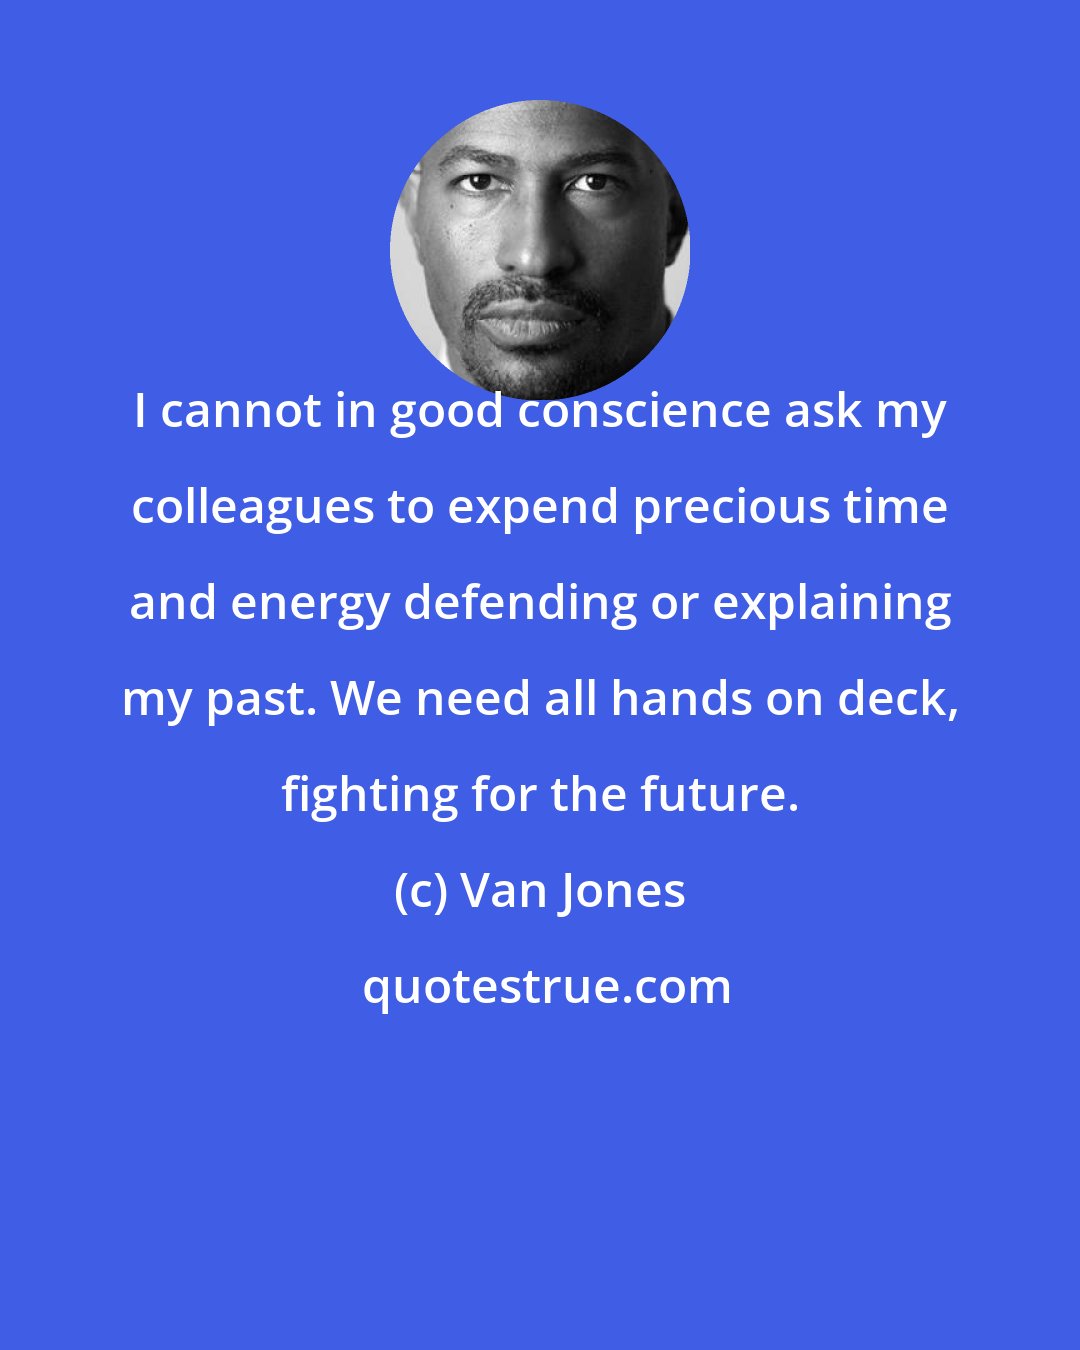 Van Jones: I cannot in good conscience ask my colleagues to expend precious time and energy defending or explaining my past. We need all hands on deck, fighting for the future.